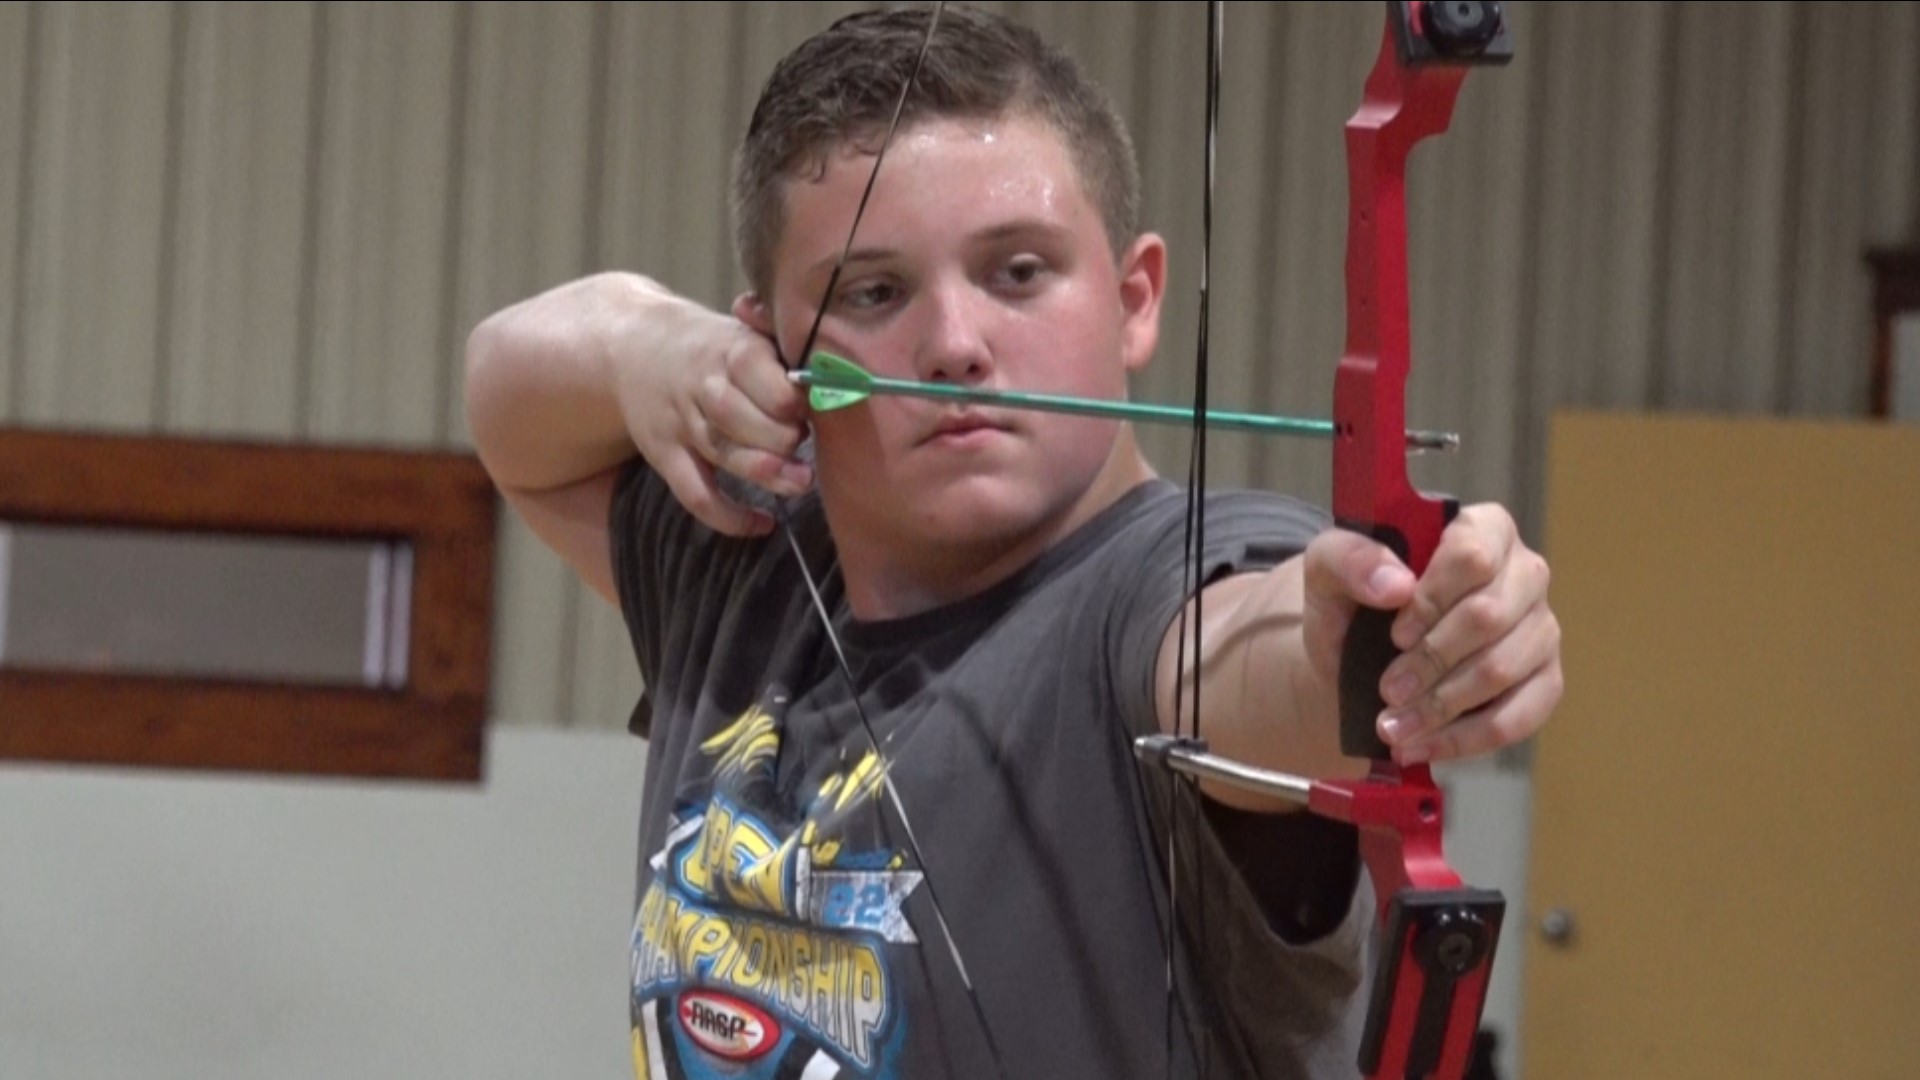 14-year-old Jake Cauthen won the NASP 3D Archery World Championship for his age group last month in Louisville, Ky.